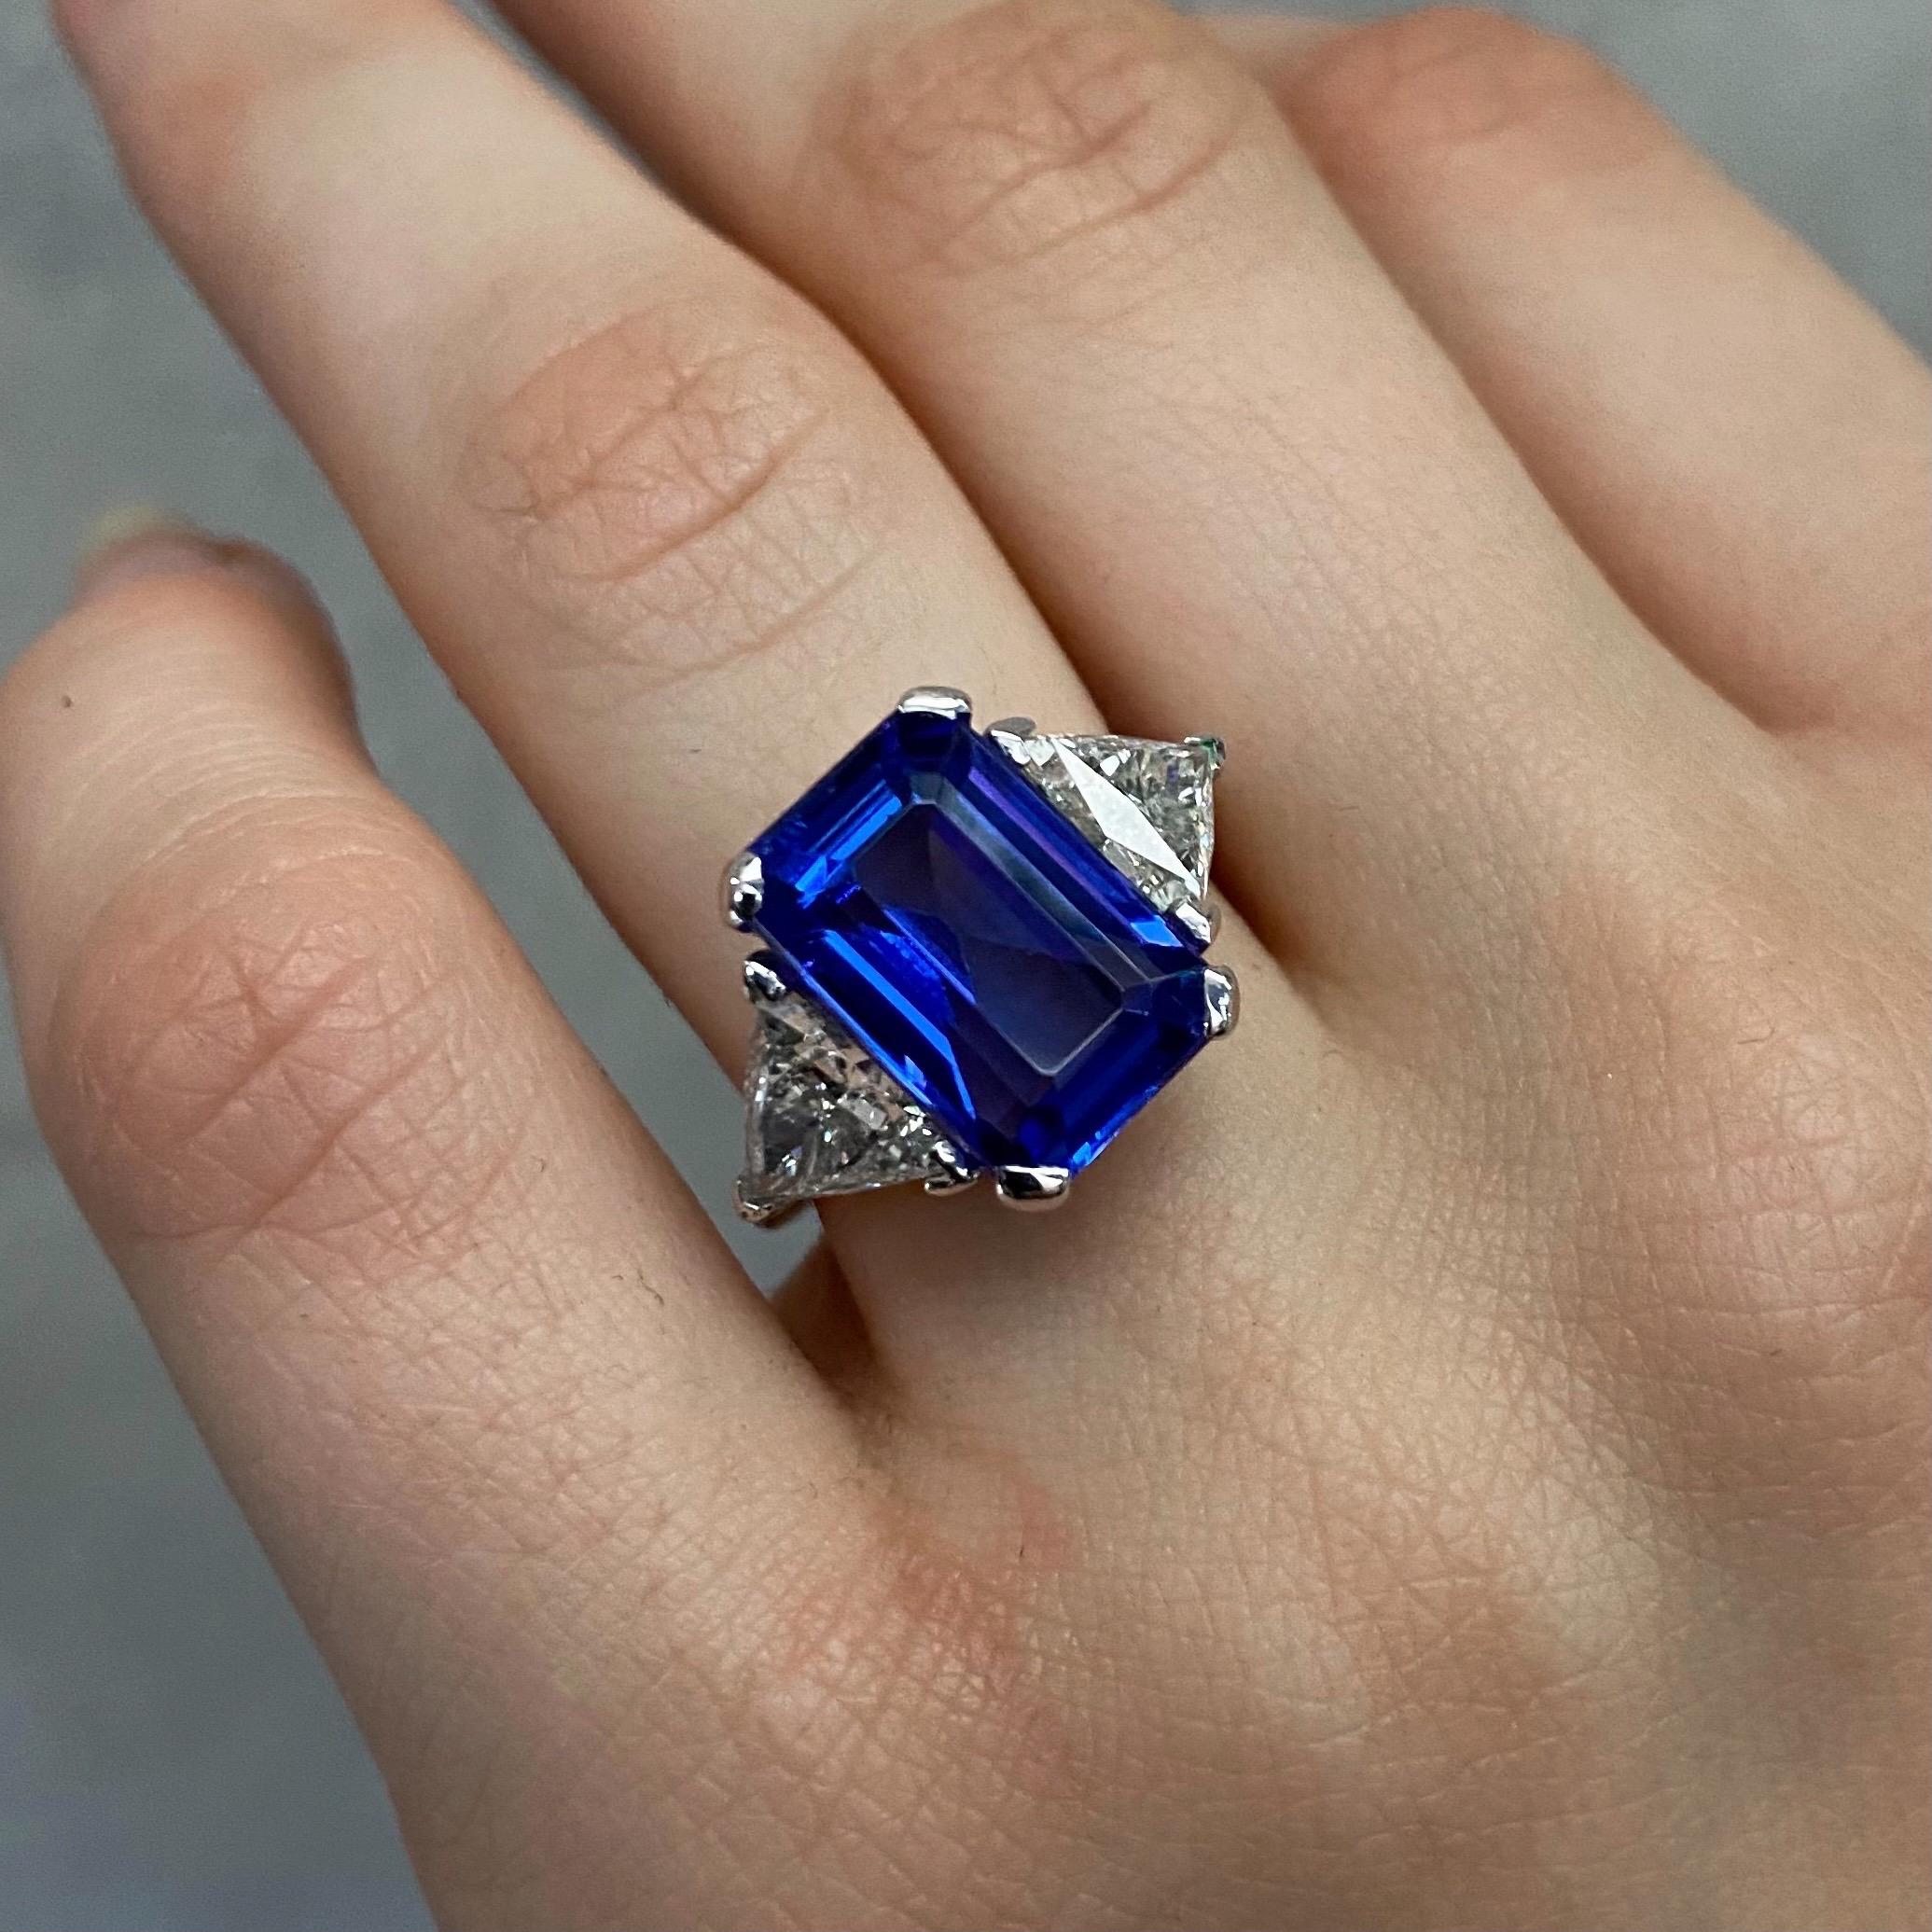 Vintage Tanzanite and Diamond Cocktail Ring in 14kt White Gold, Portugal, 1990s. This breathtaking jewel features a certified an intense slightly purplish blue 6.49-carat emerald-cut tanzanite claw-set to the centre, flanked to each side by a